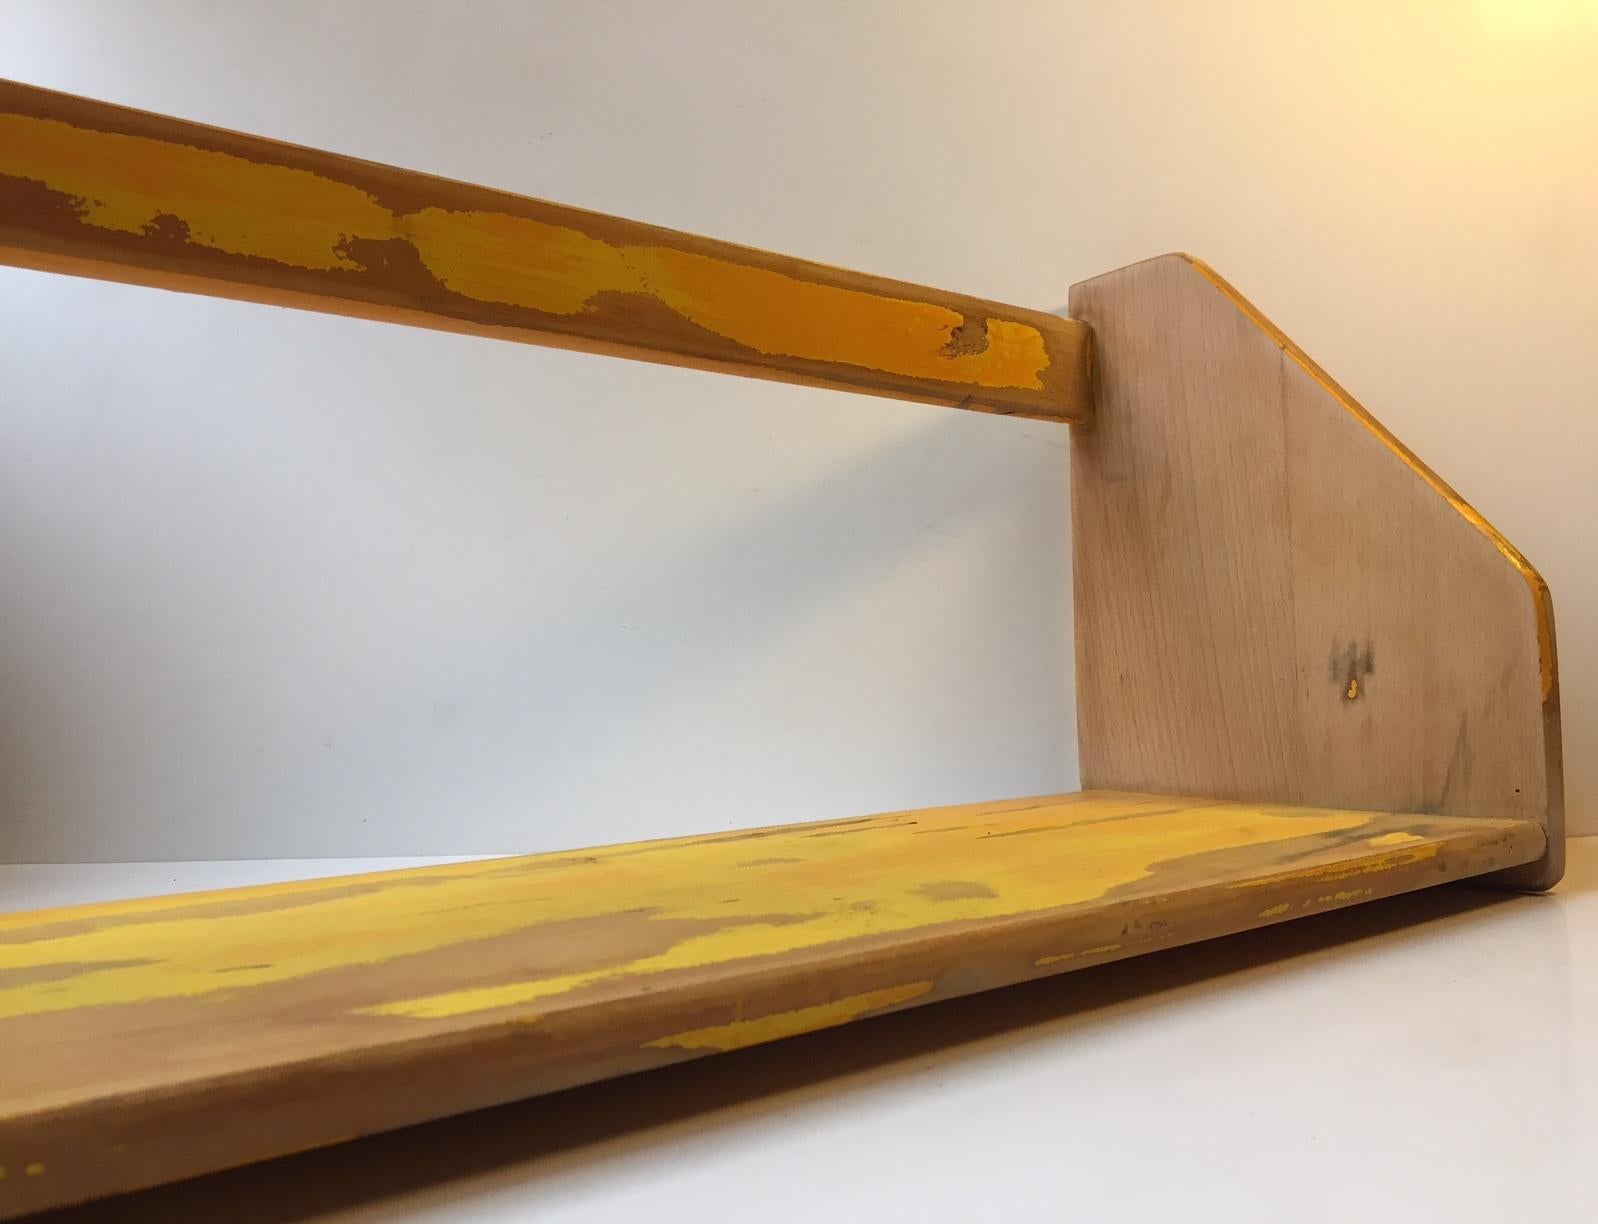 Vintage Danish modern oak shelf with rustic yellow lacquer treatment. Designed by Hans Jorgen Wegner
and manufactured by Ry Møbler in during the 1950s.